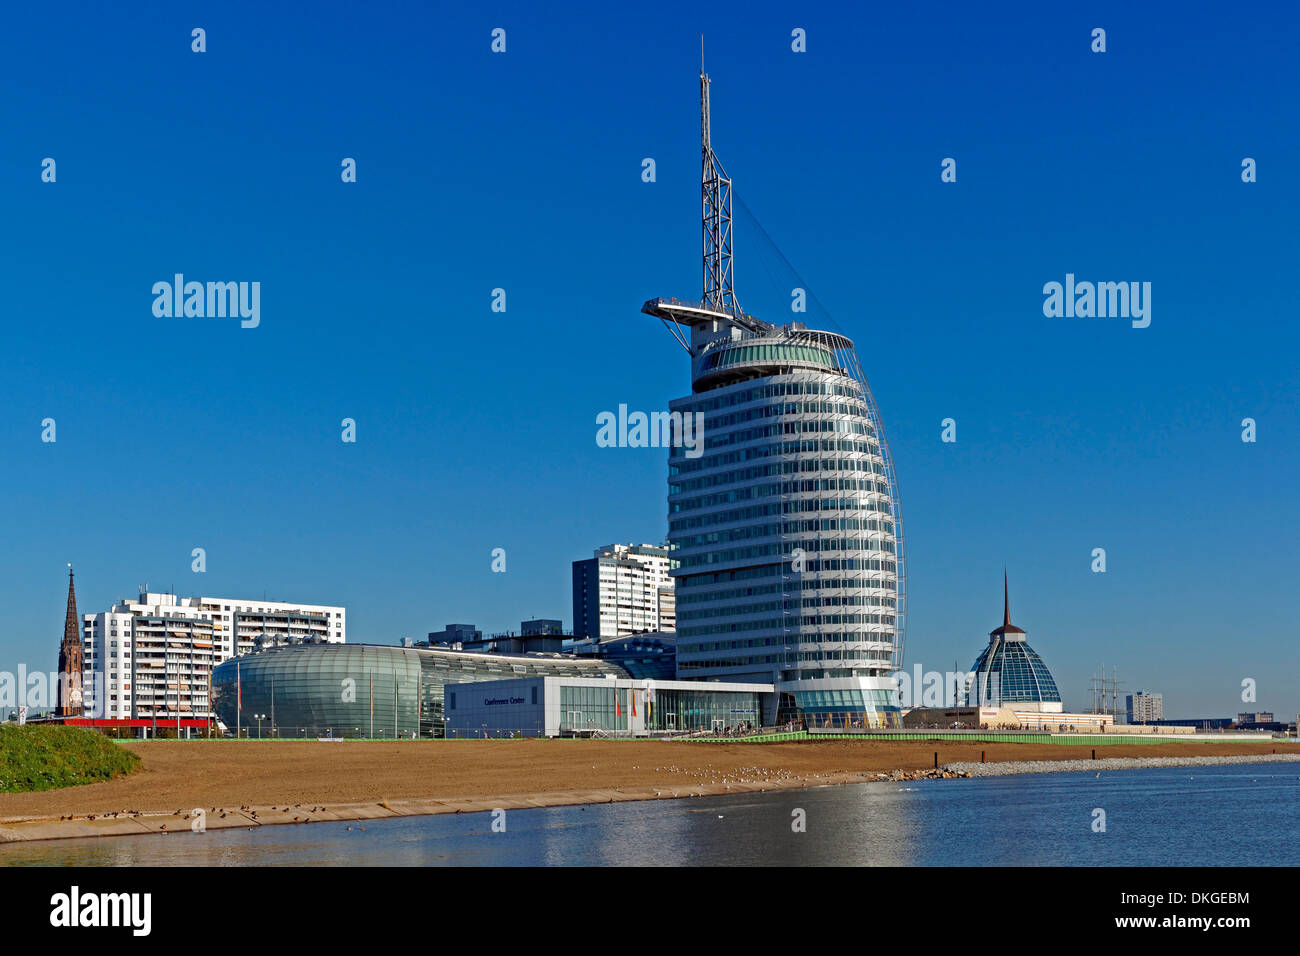 Atlantic Hotel Sail City, Klimahaus and Conference Center, Bremerhaven, Germany, Europe Stock Photo